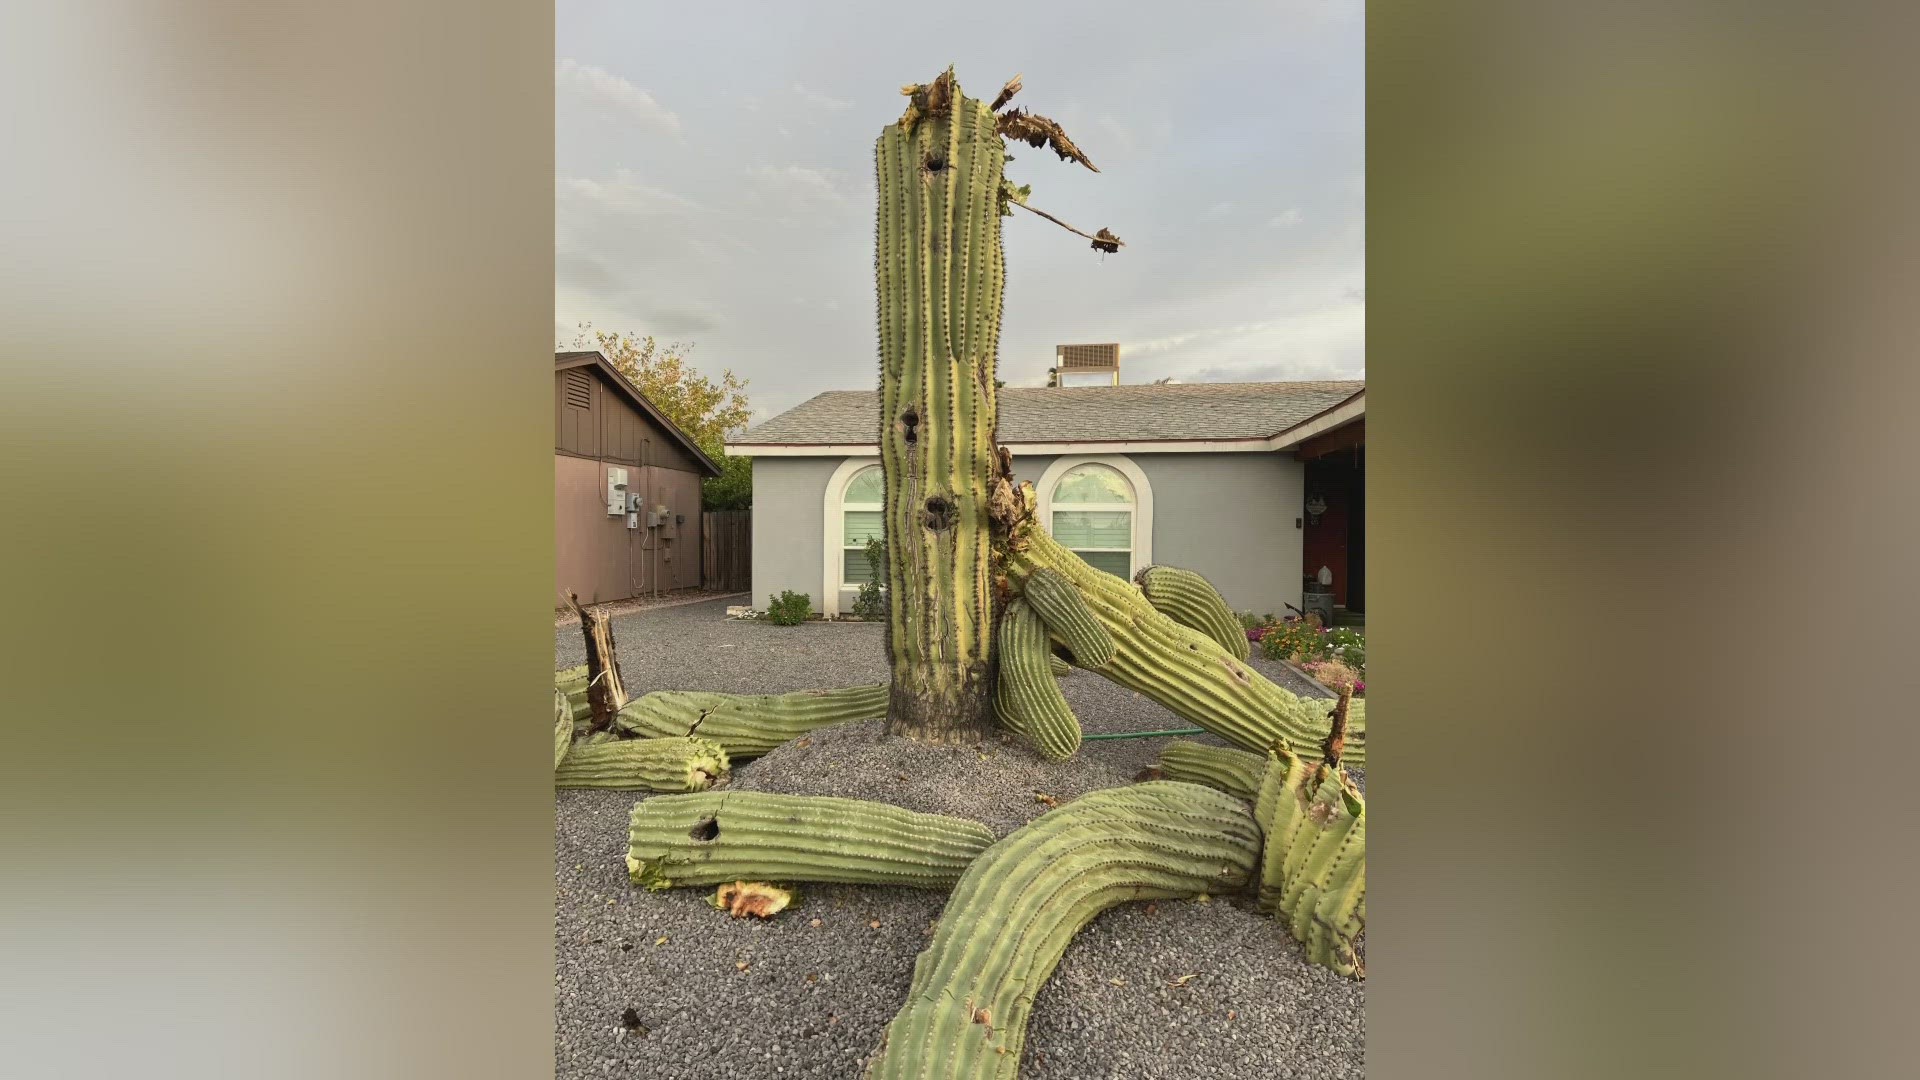 The extreme heat is taking a toll on the cacti.